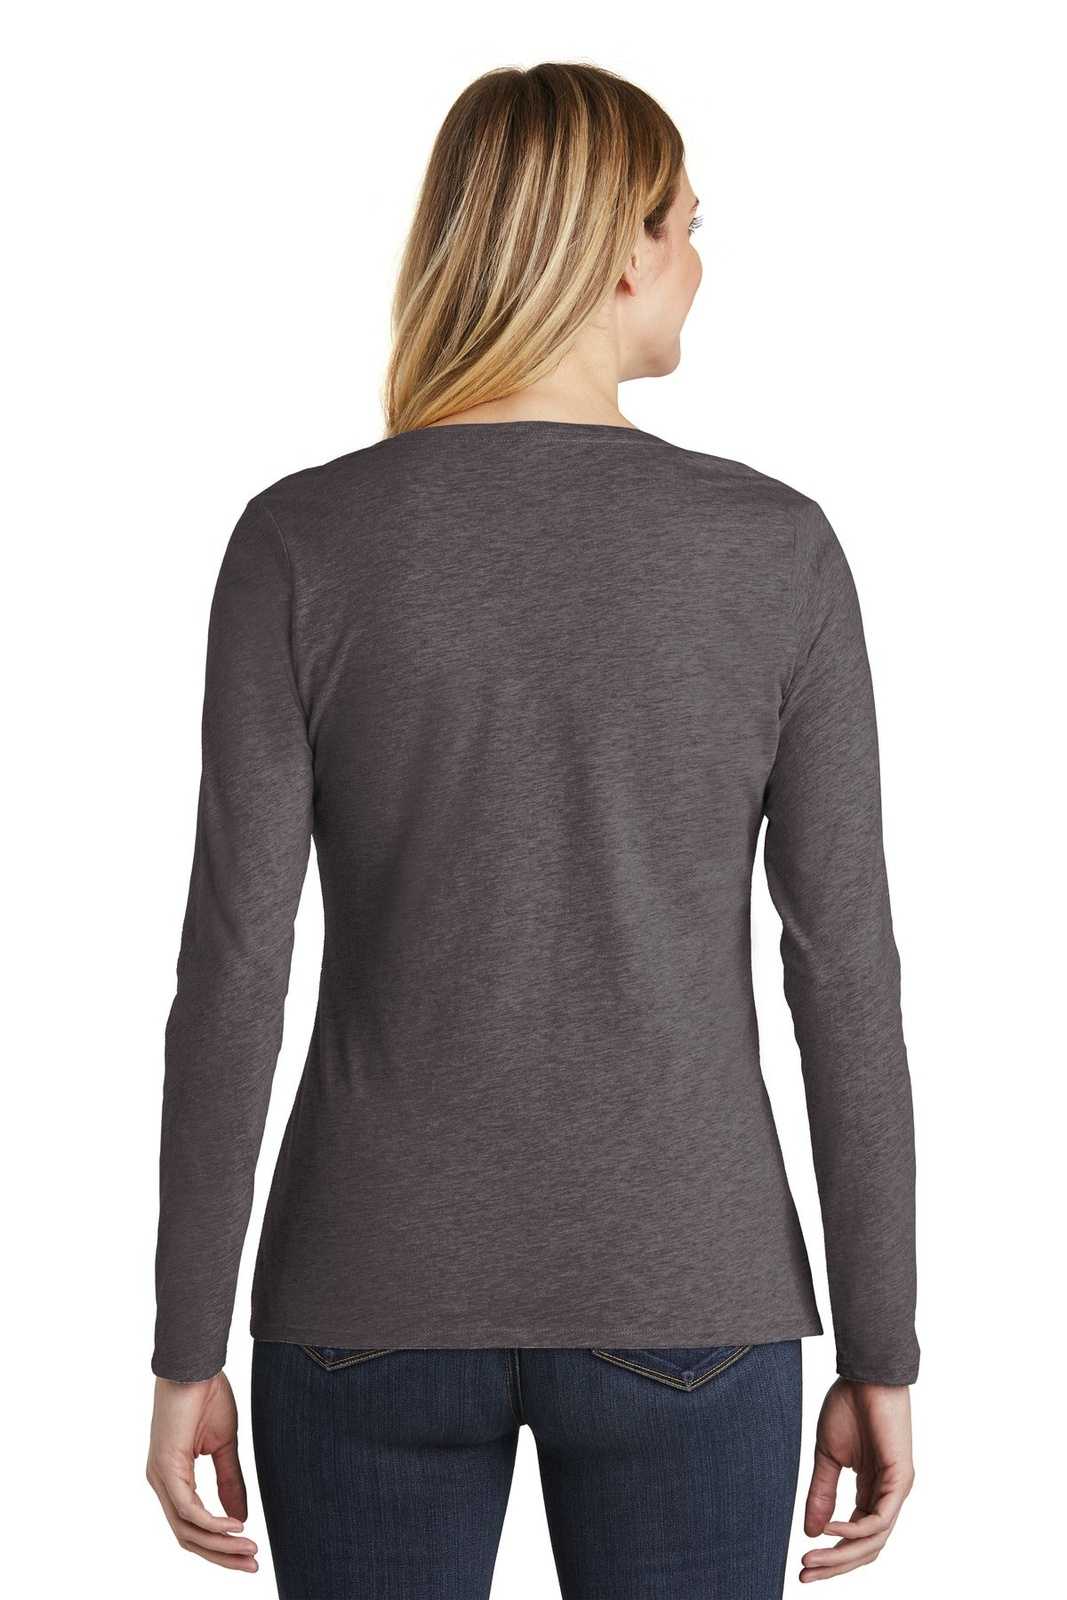 District DT6201 Women's Very Important Tee Long Sleeve V-Neck - Heathered Charcoal - HIT a Double - 1